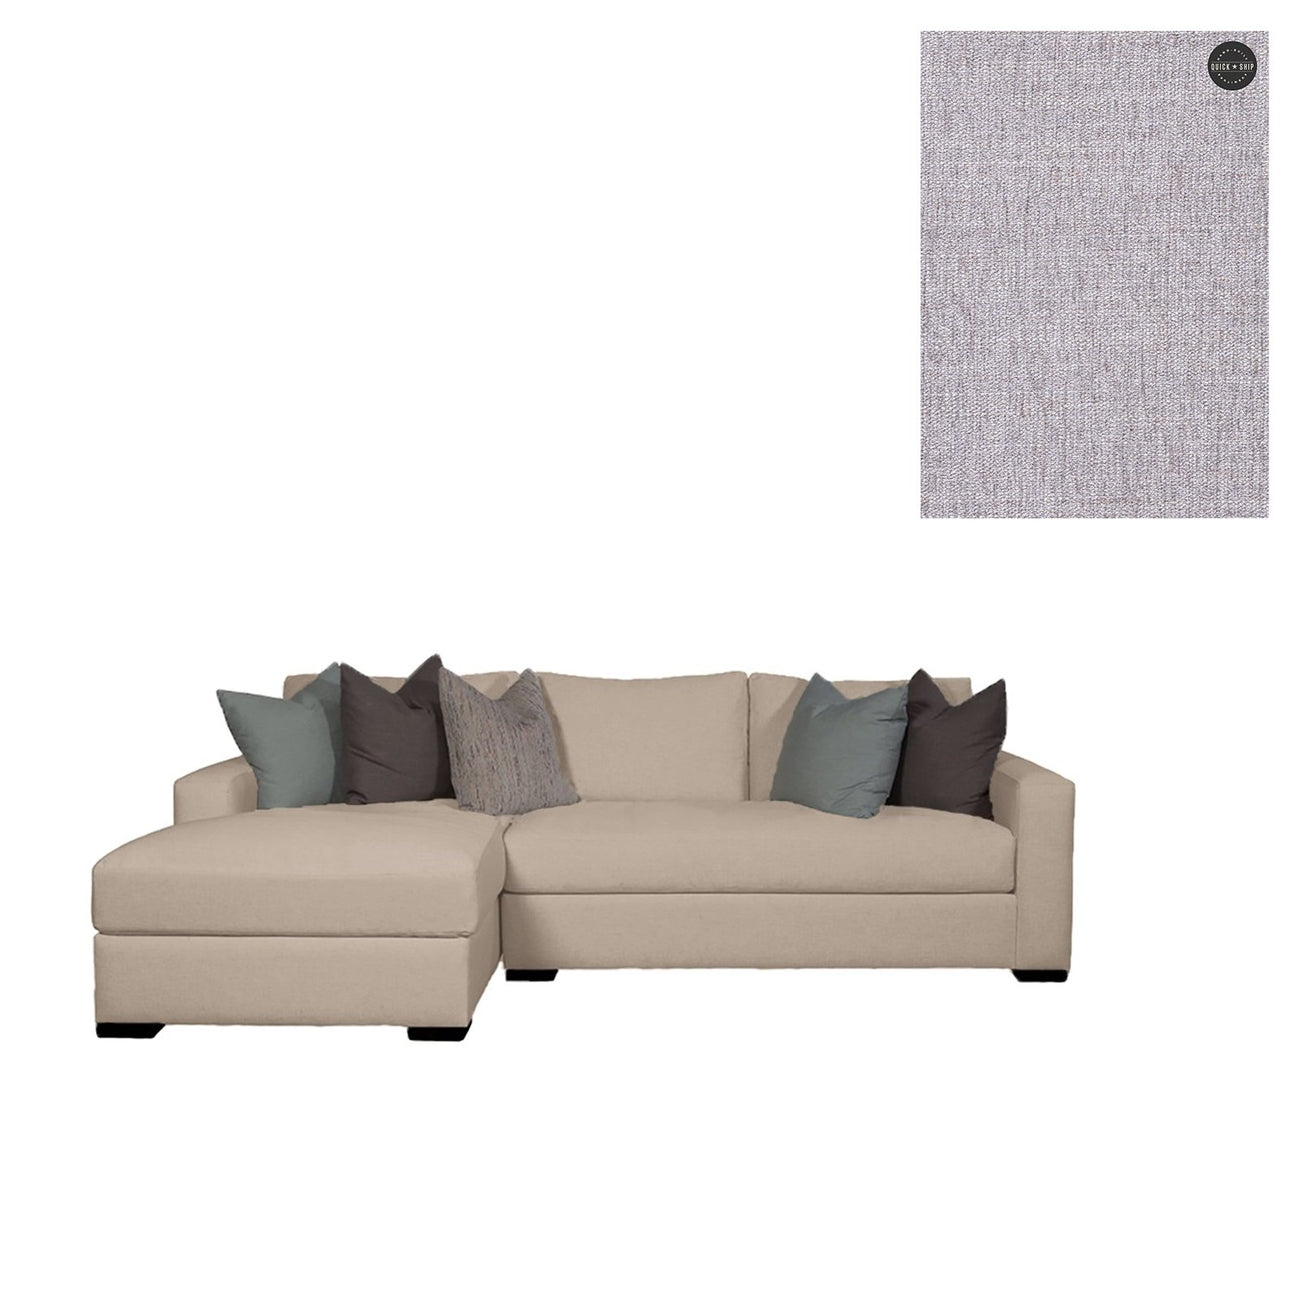 Gia Sectional-Younger-YNGR-49537-49561-3101-SC-SectionalsRight Arm Facing Chaise-Standard Cushion-Polyester/Linen-3101-38-France and Son